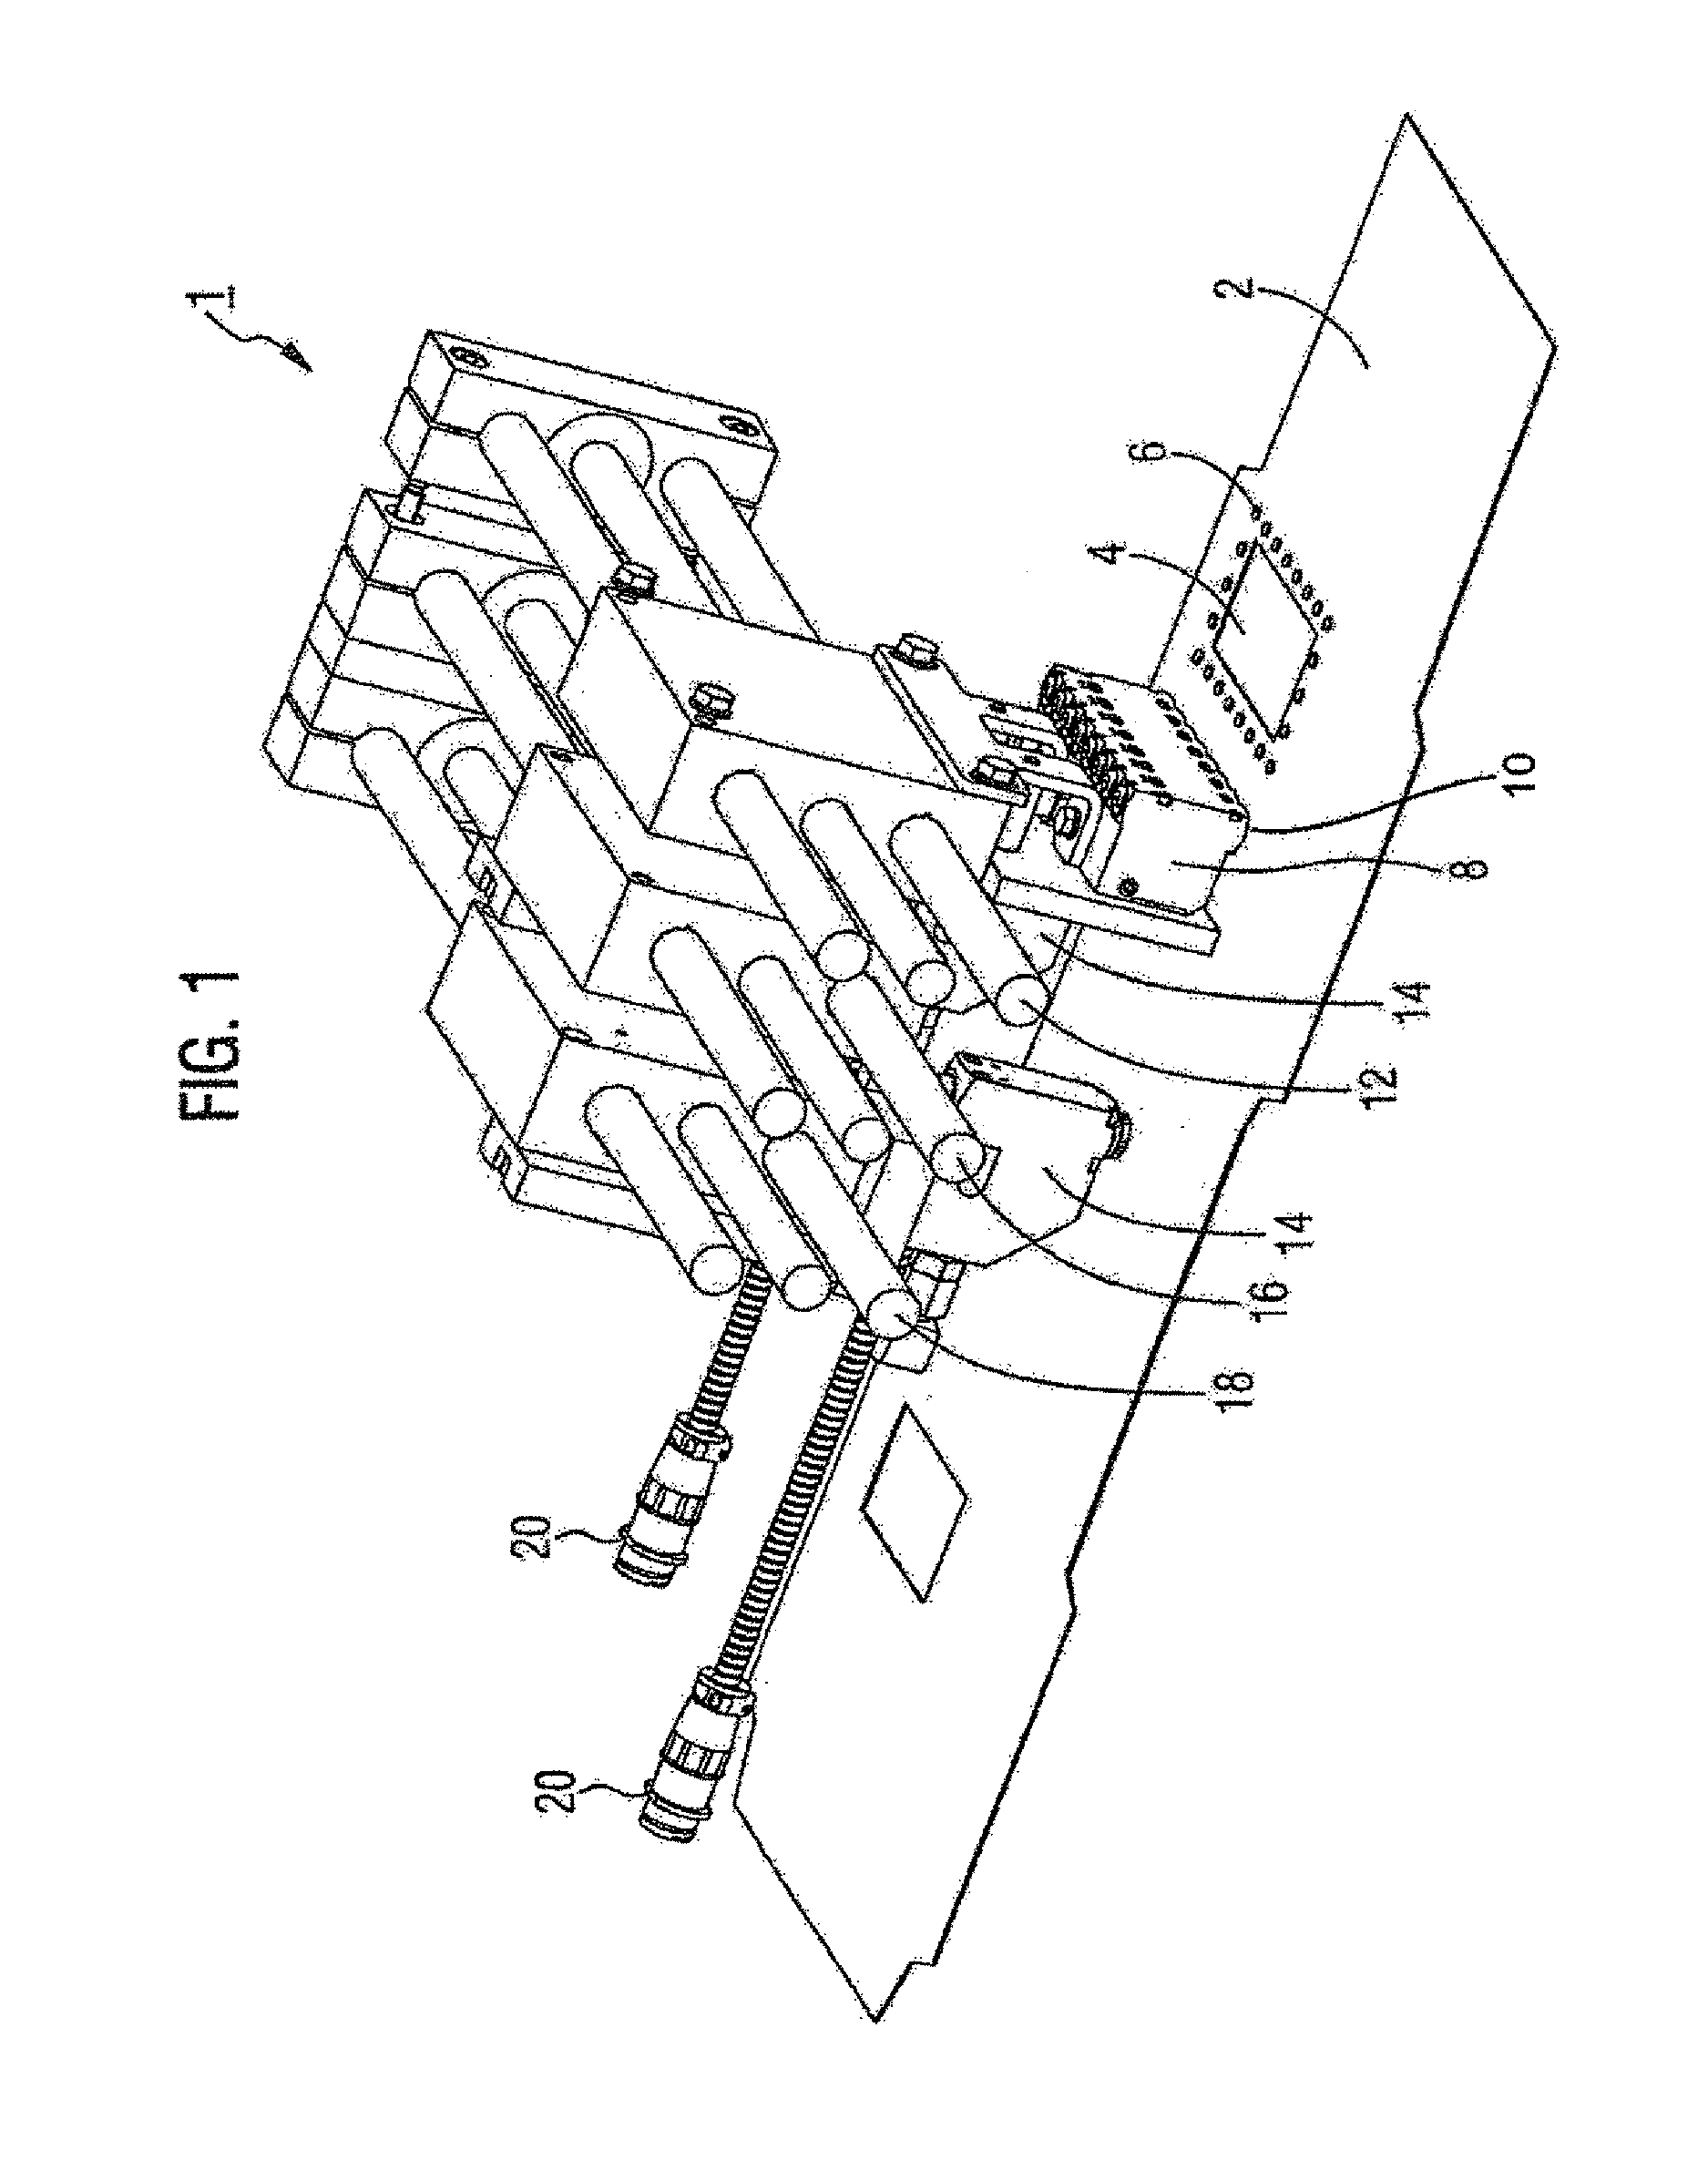 Device for applying adhesive to a material